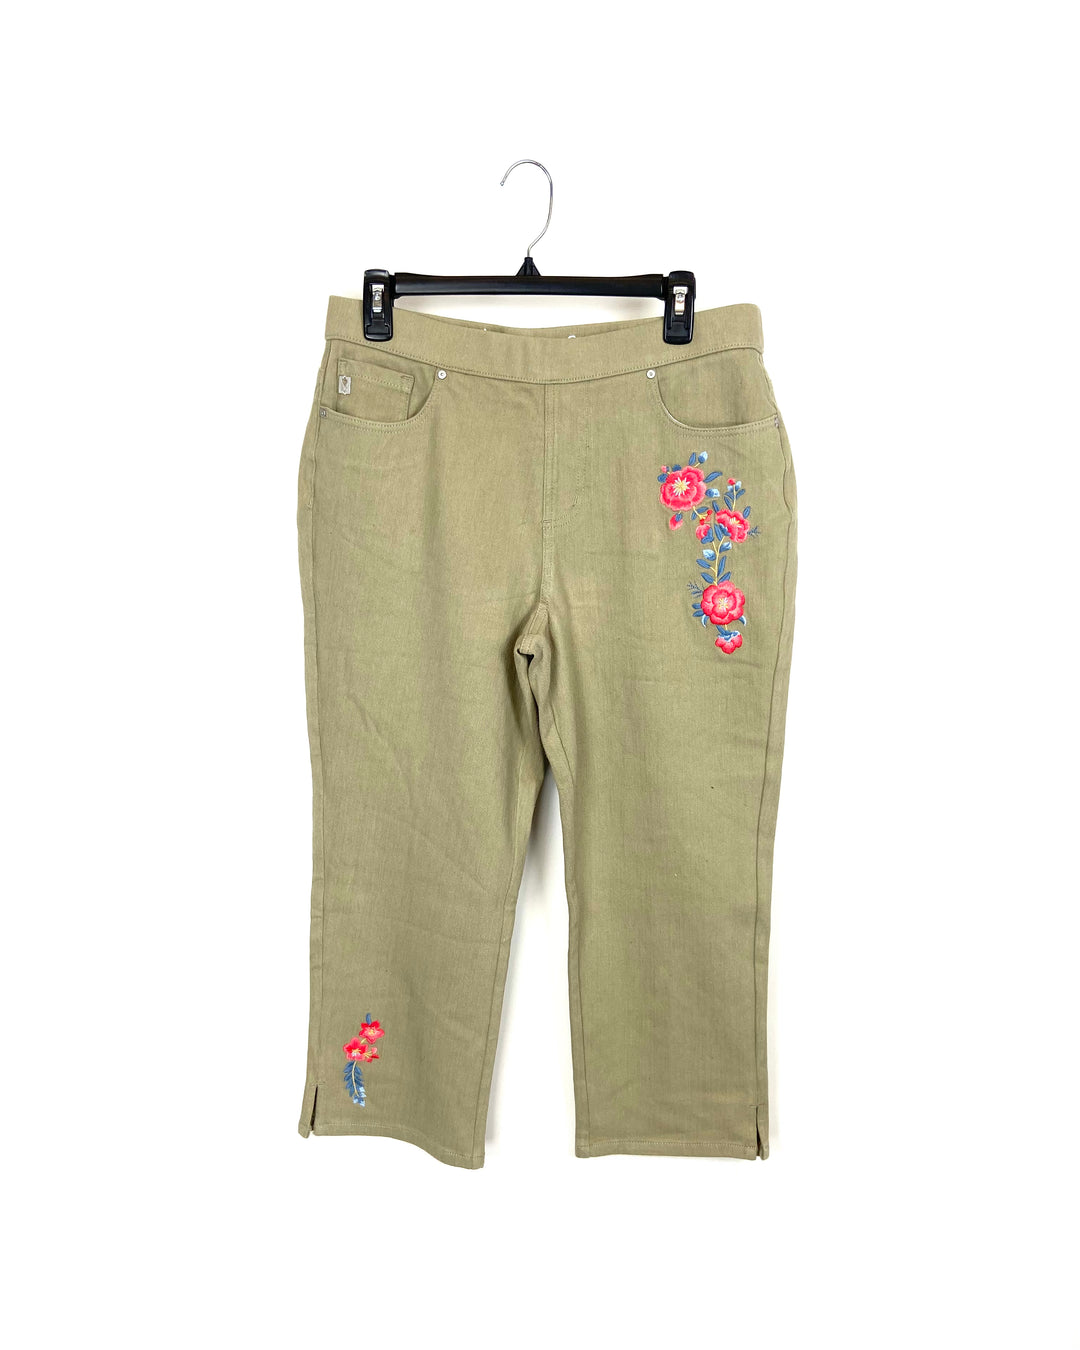 Beige Jeans with Floral Embroidery - Size 6/8 and 12/14